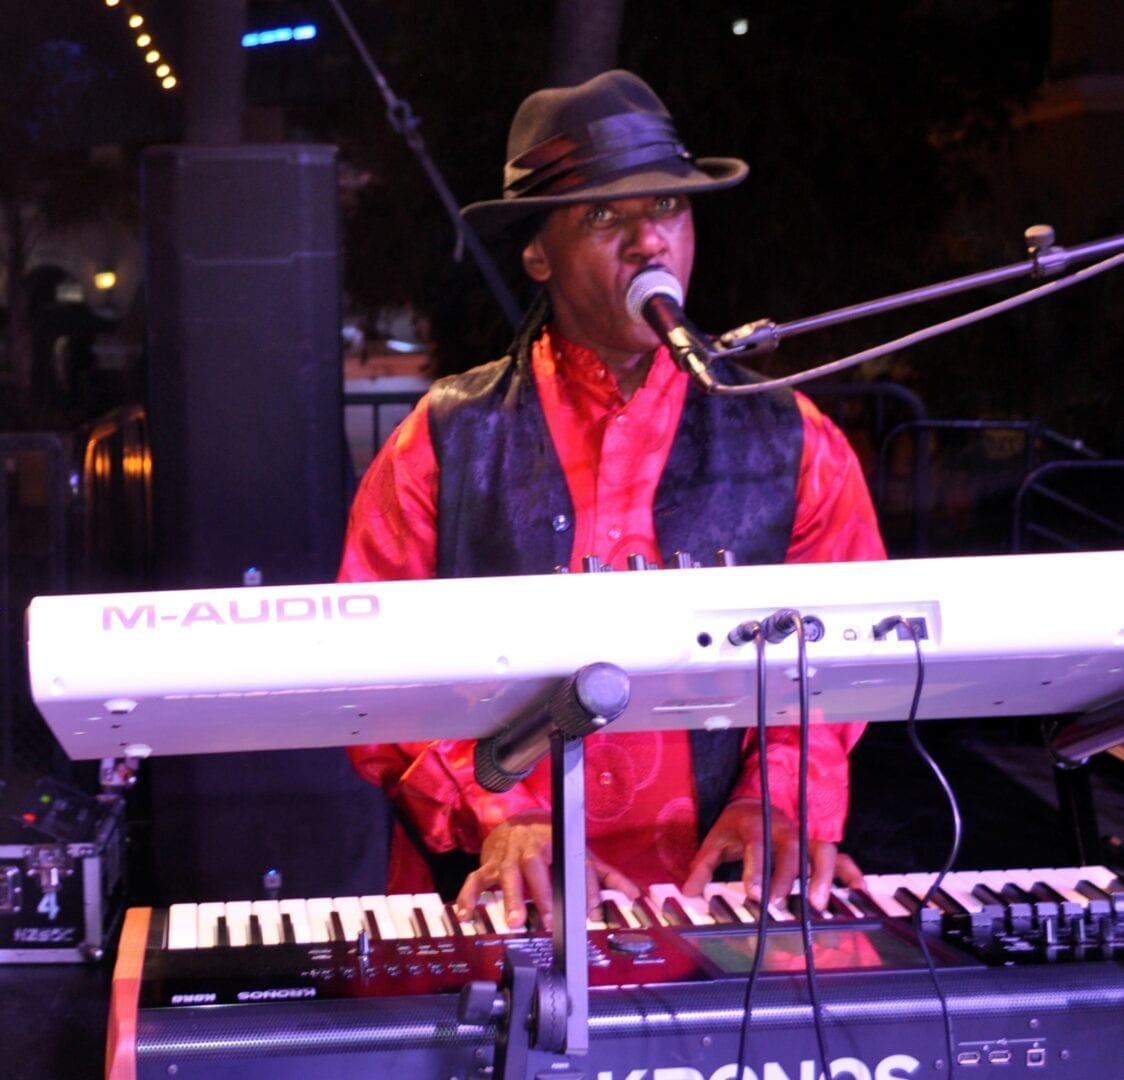 A man in red shirt playing keyboard and microphone.